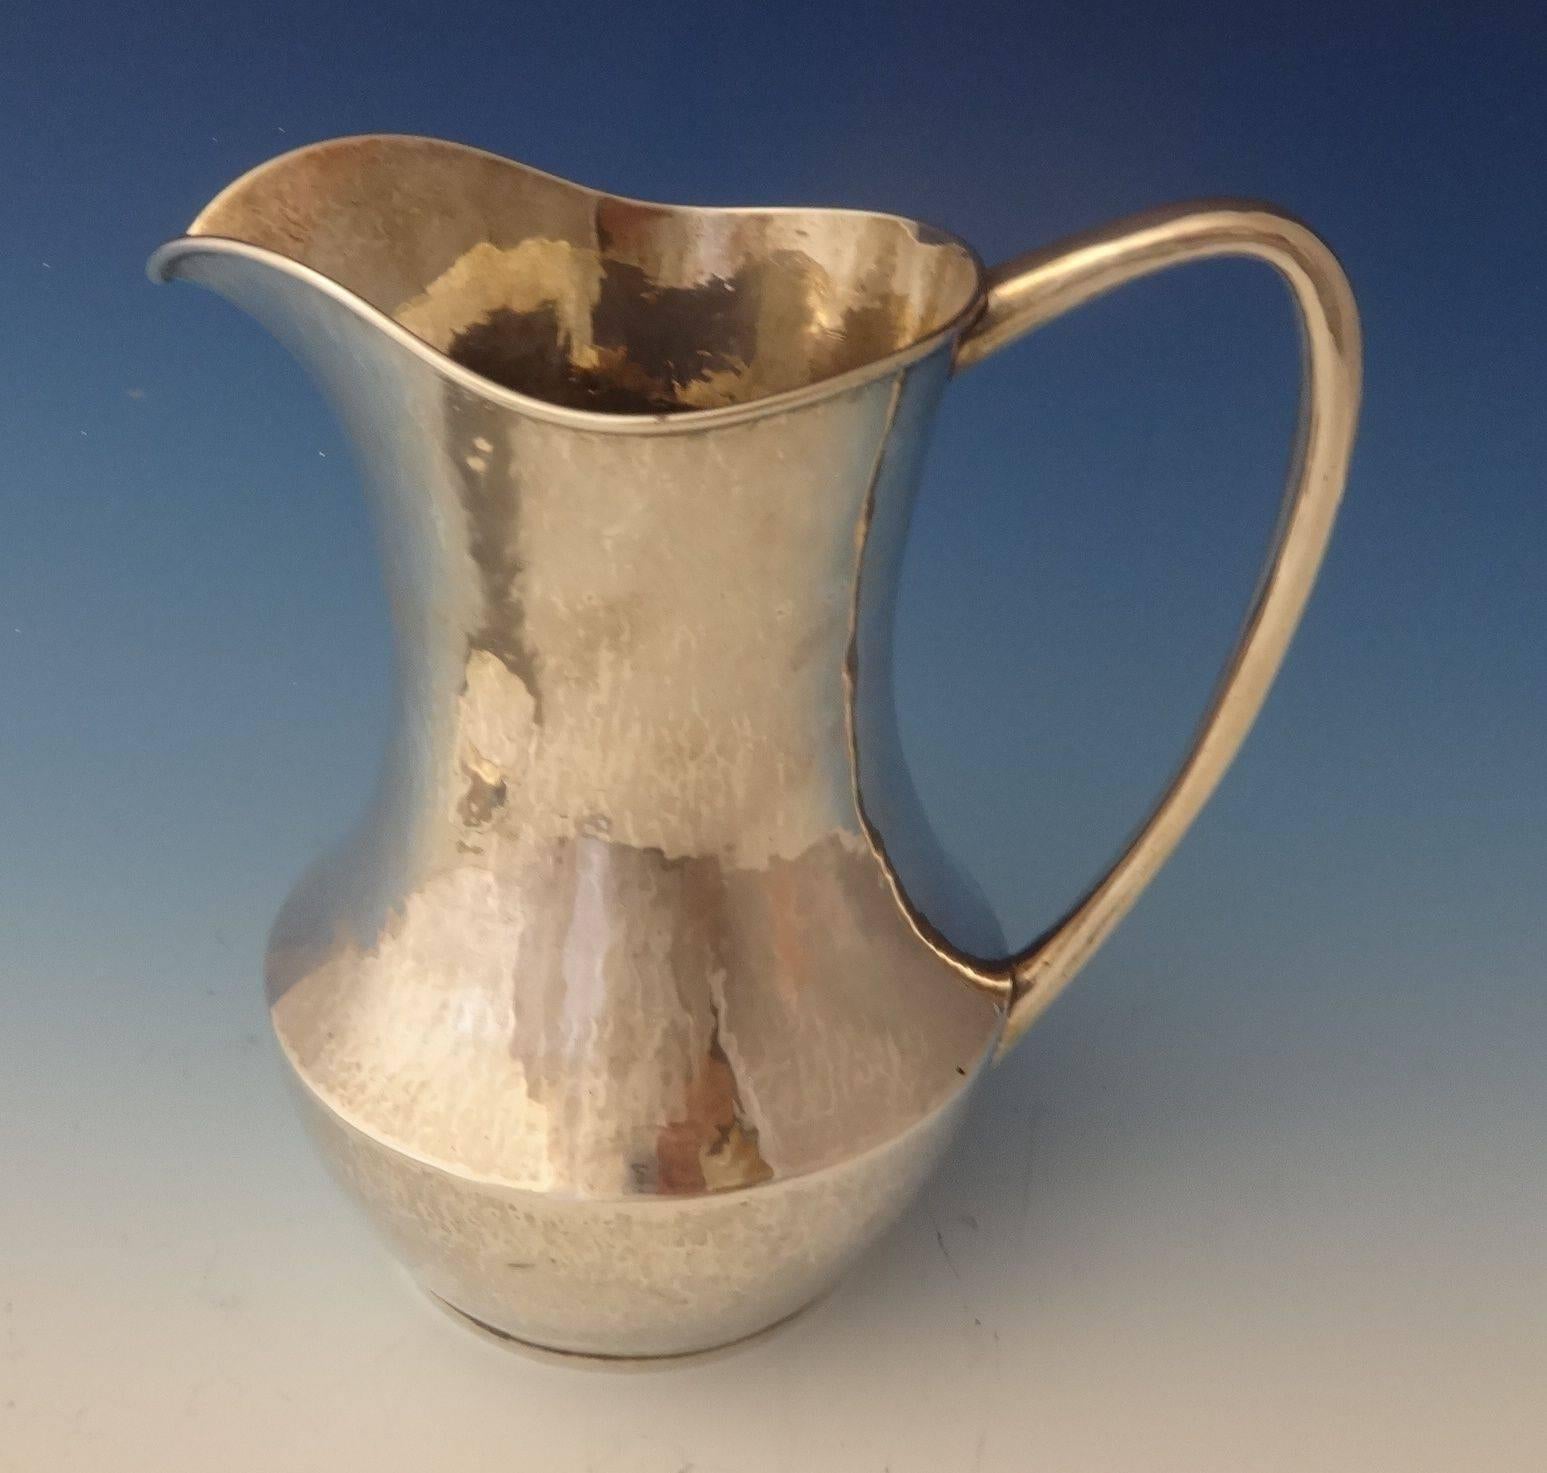 Kalo. 
 
 This simple yet elegant sterling water pitcher was hand-wrought by The Kalo Shop of Chicago, IL. It is beautifully hand-hammered and comes with the underplate. The pieces date from the 1900-40's, and there is a monogram on the bottom that